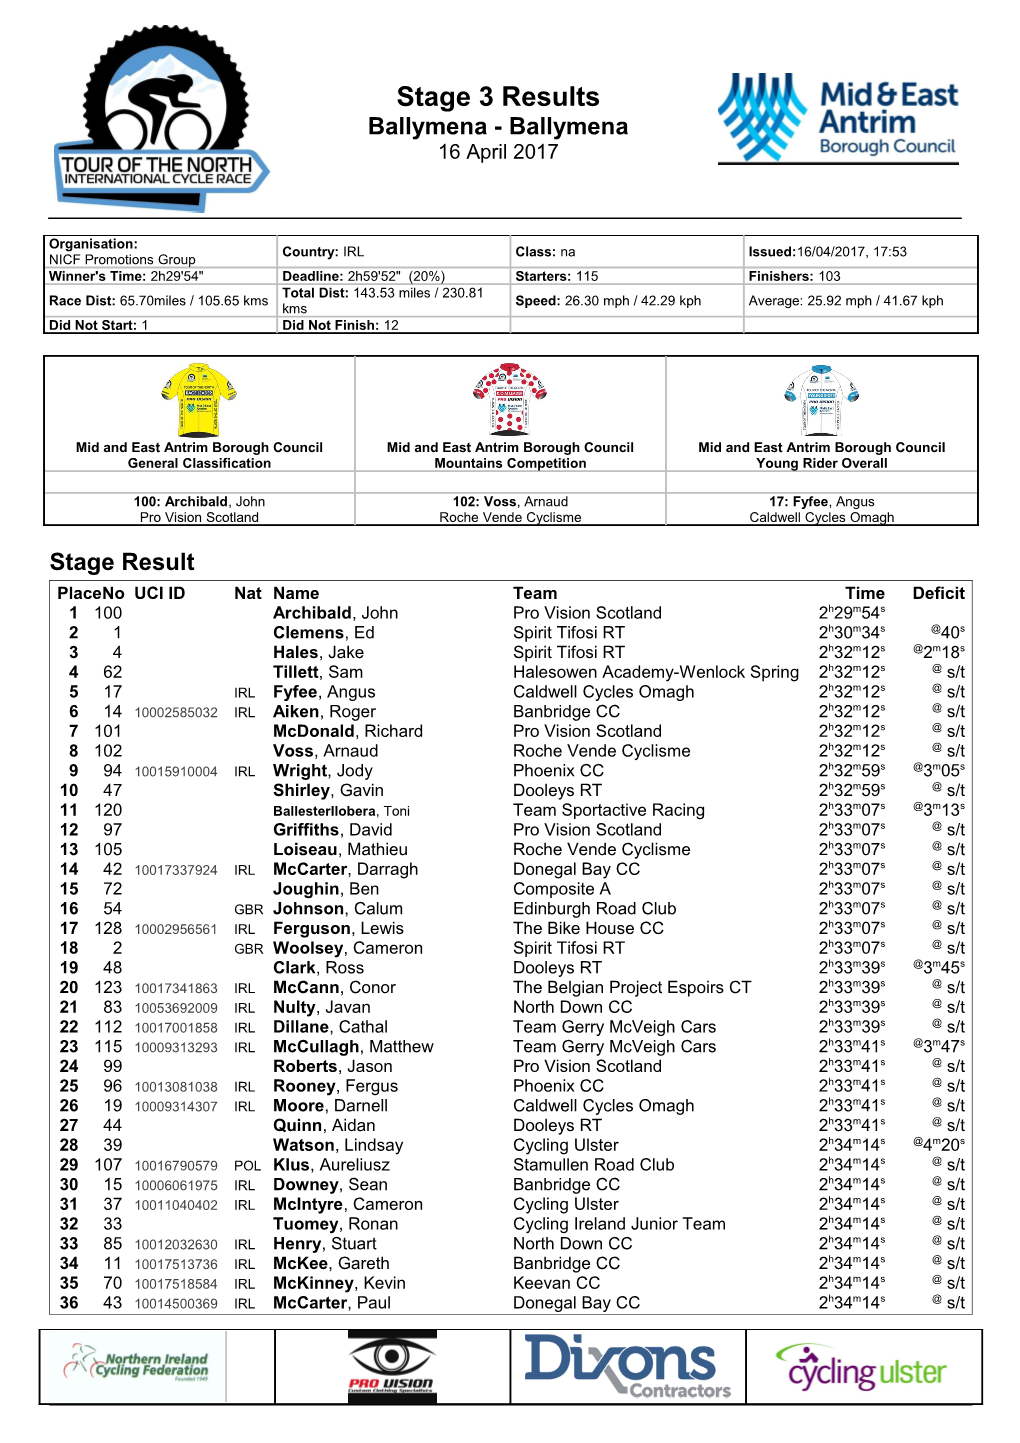 Stage 3 Results, Page: 1